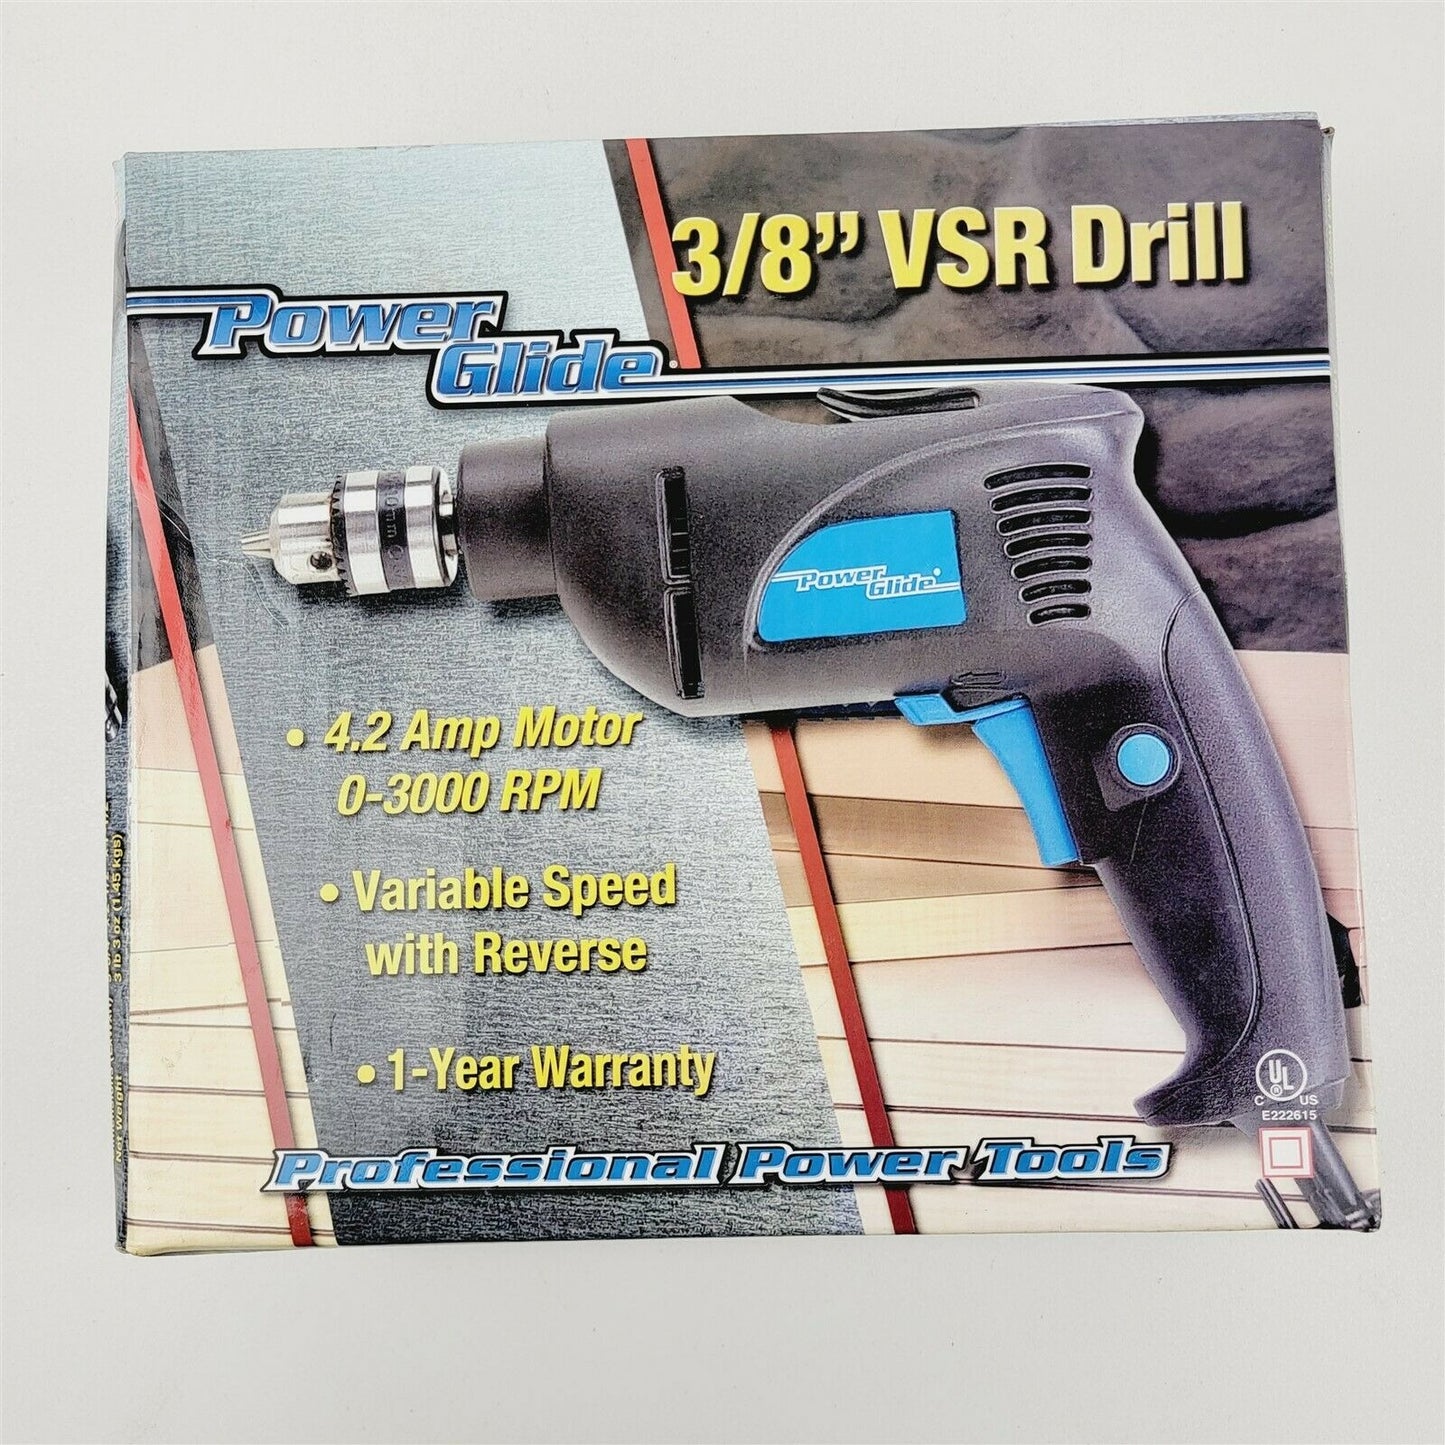 Power Glide 3/8" VSR Drill Professional Power Tools Corded Electric Drill